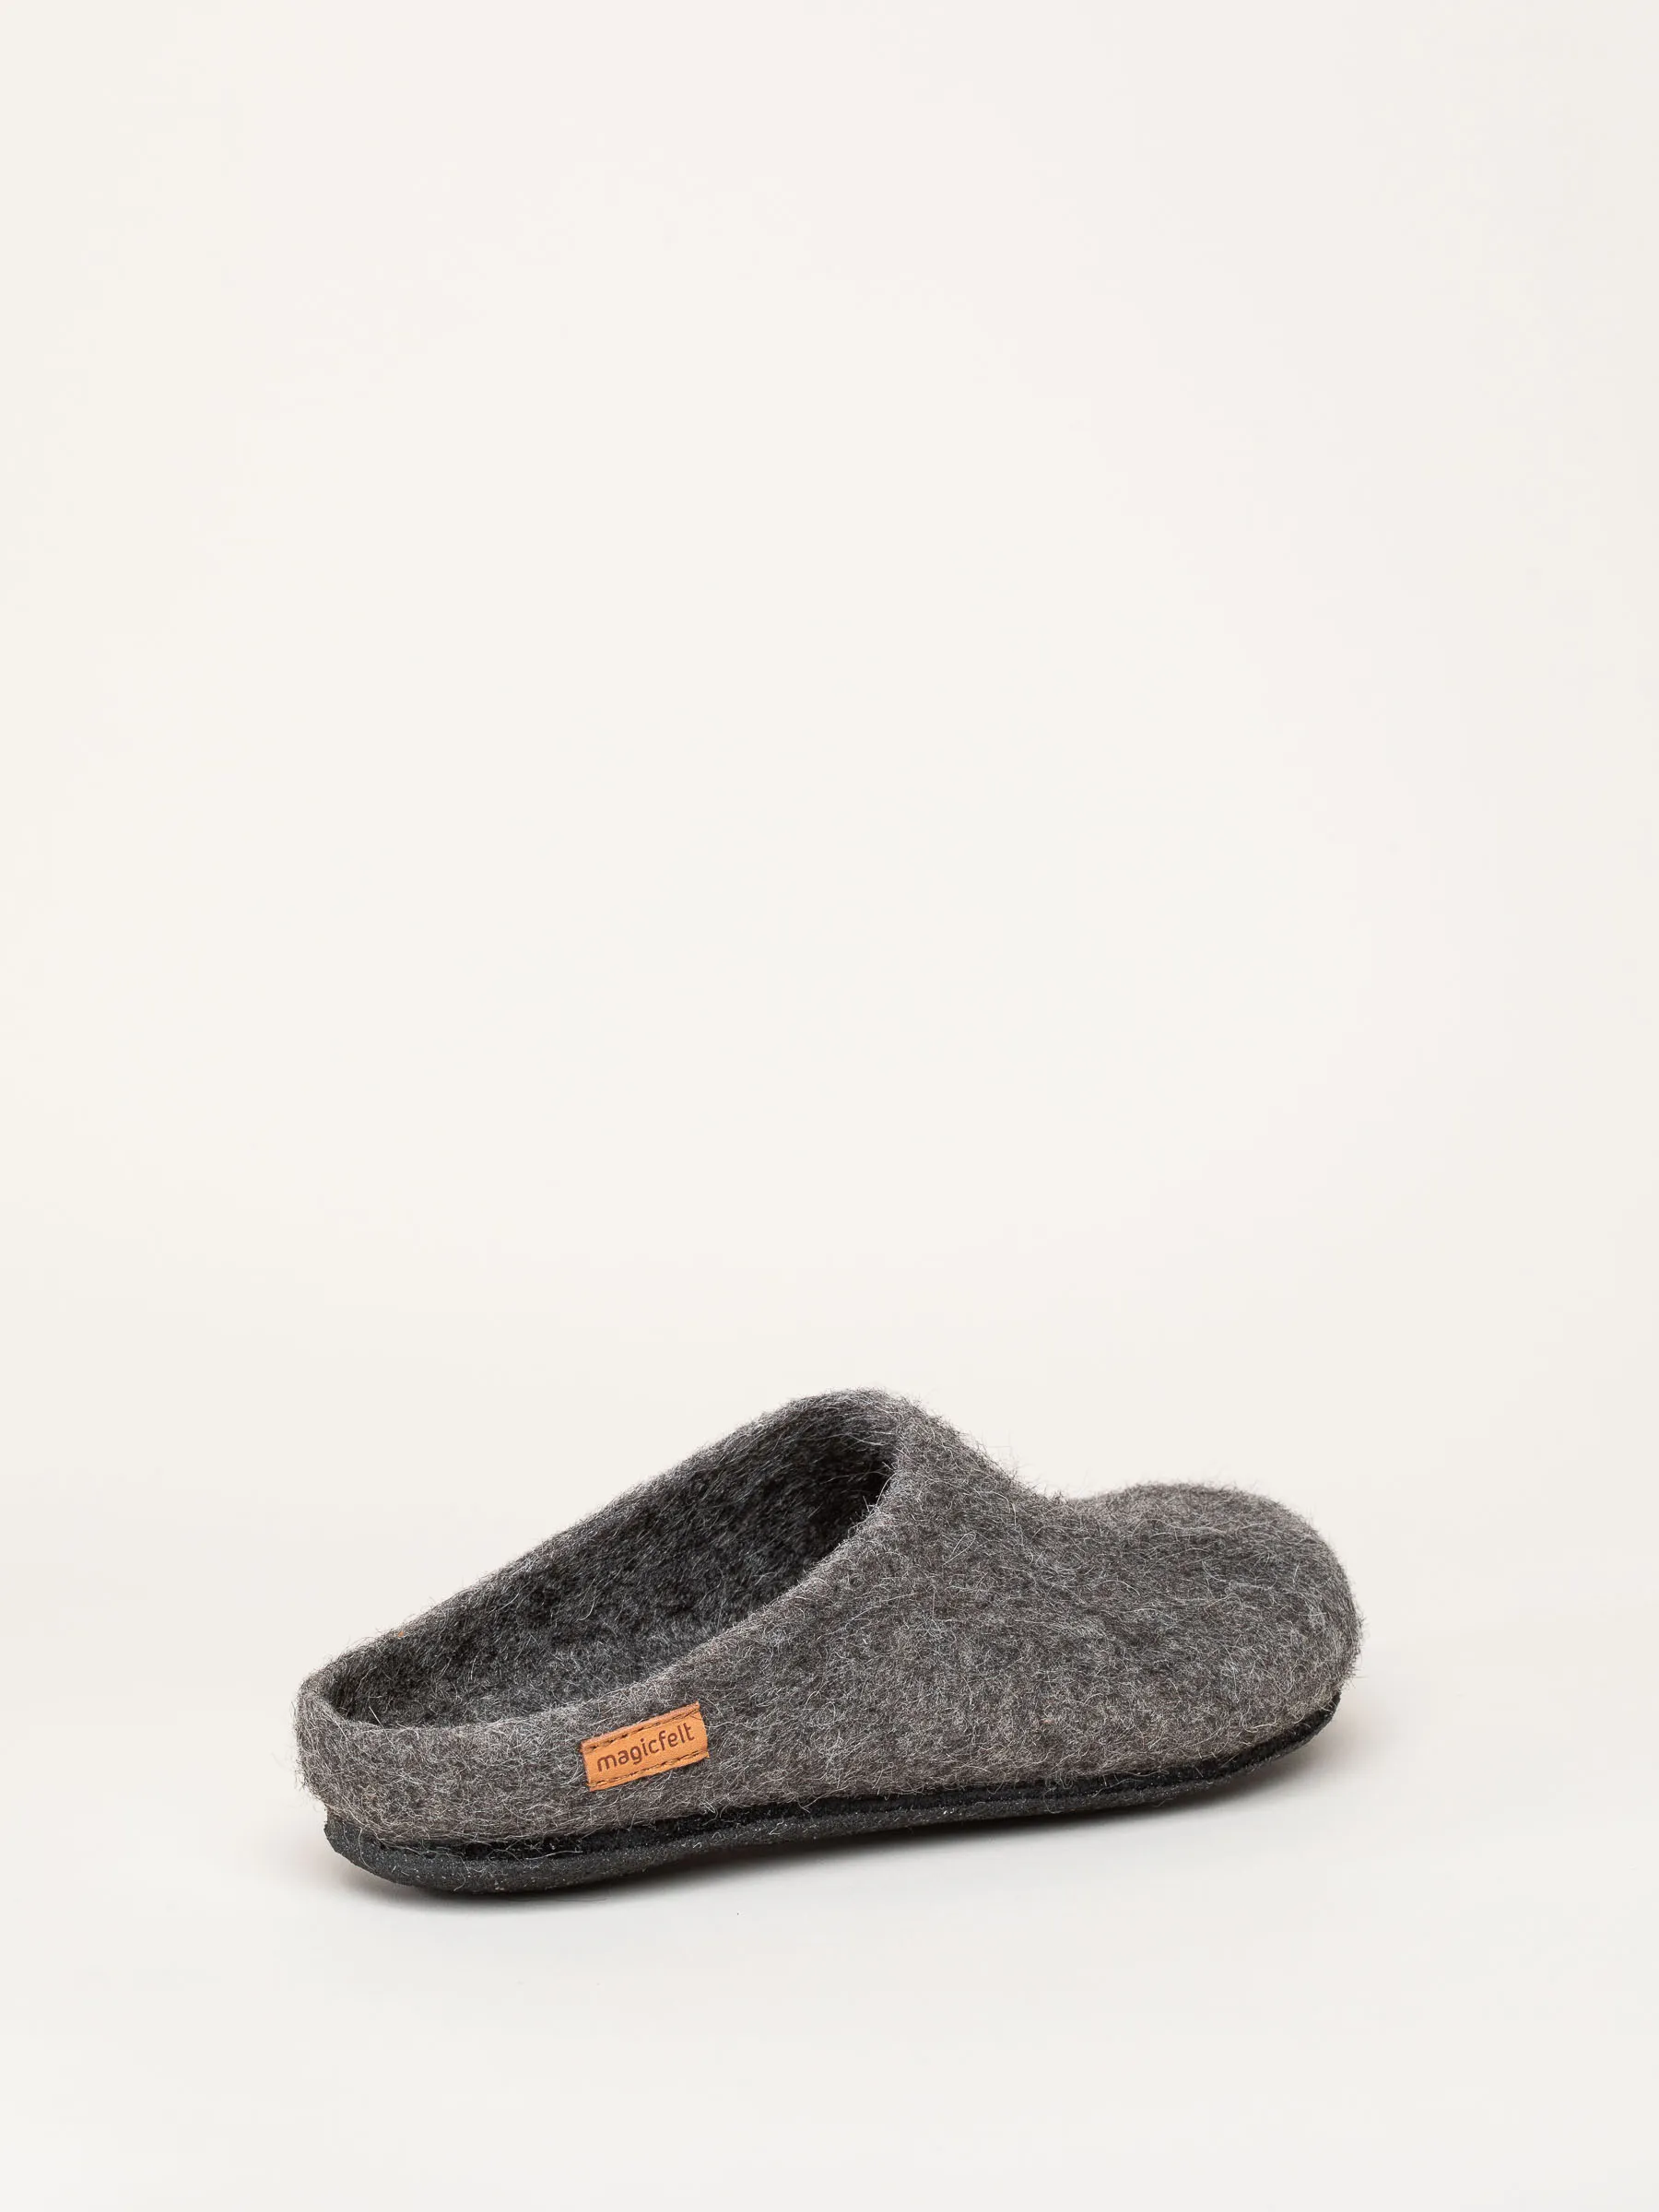 Light Grey Wool Slippers from HumanKind Fair Trade - HumanKind Fair Trade